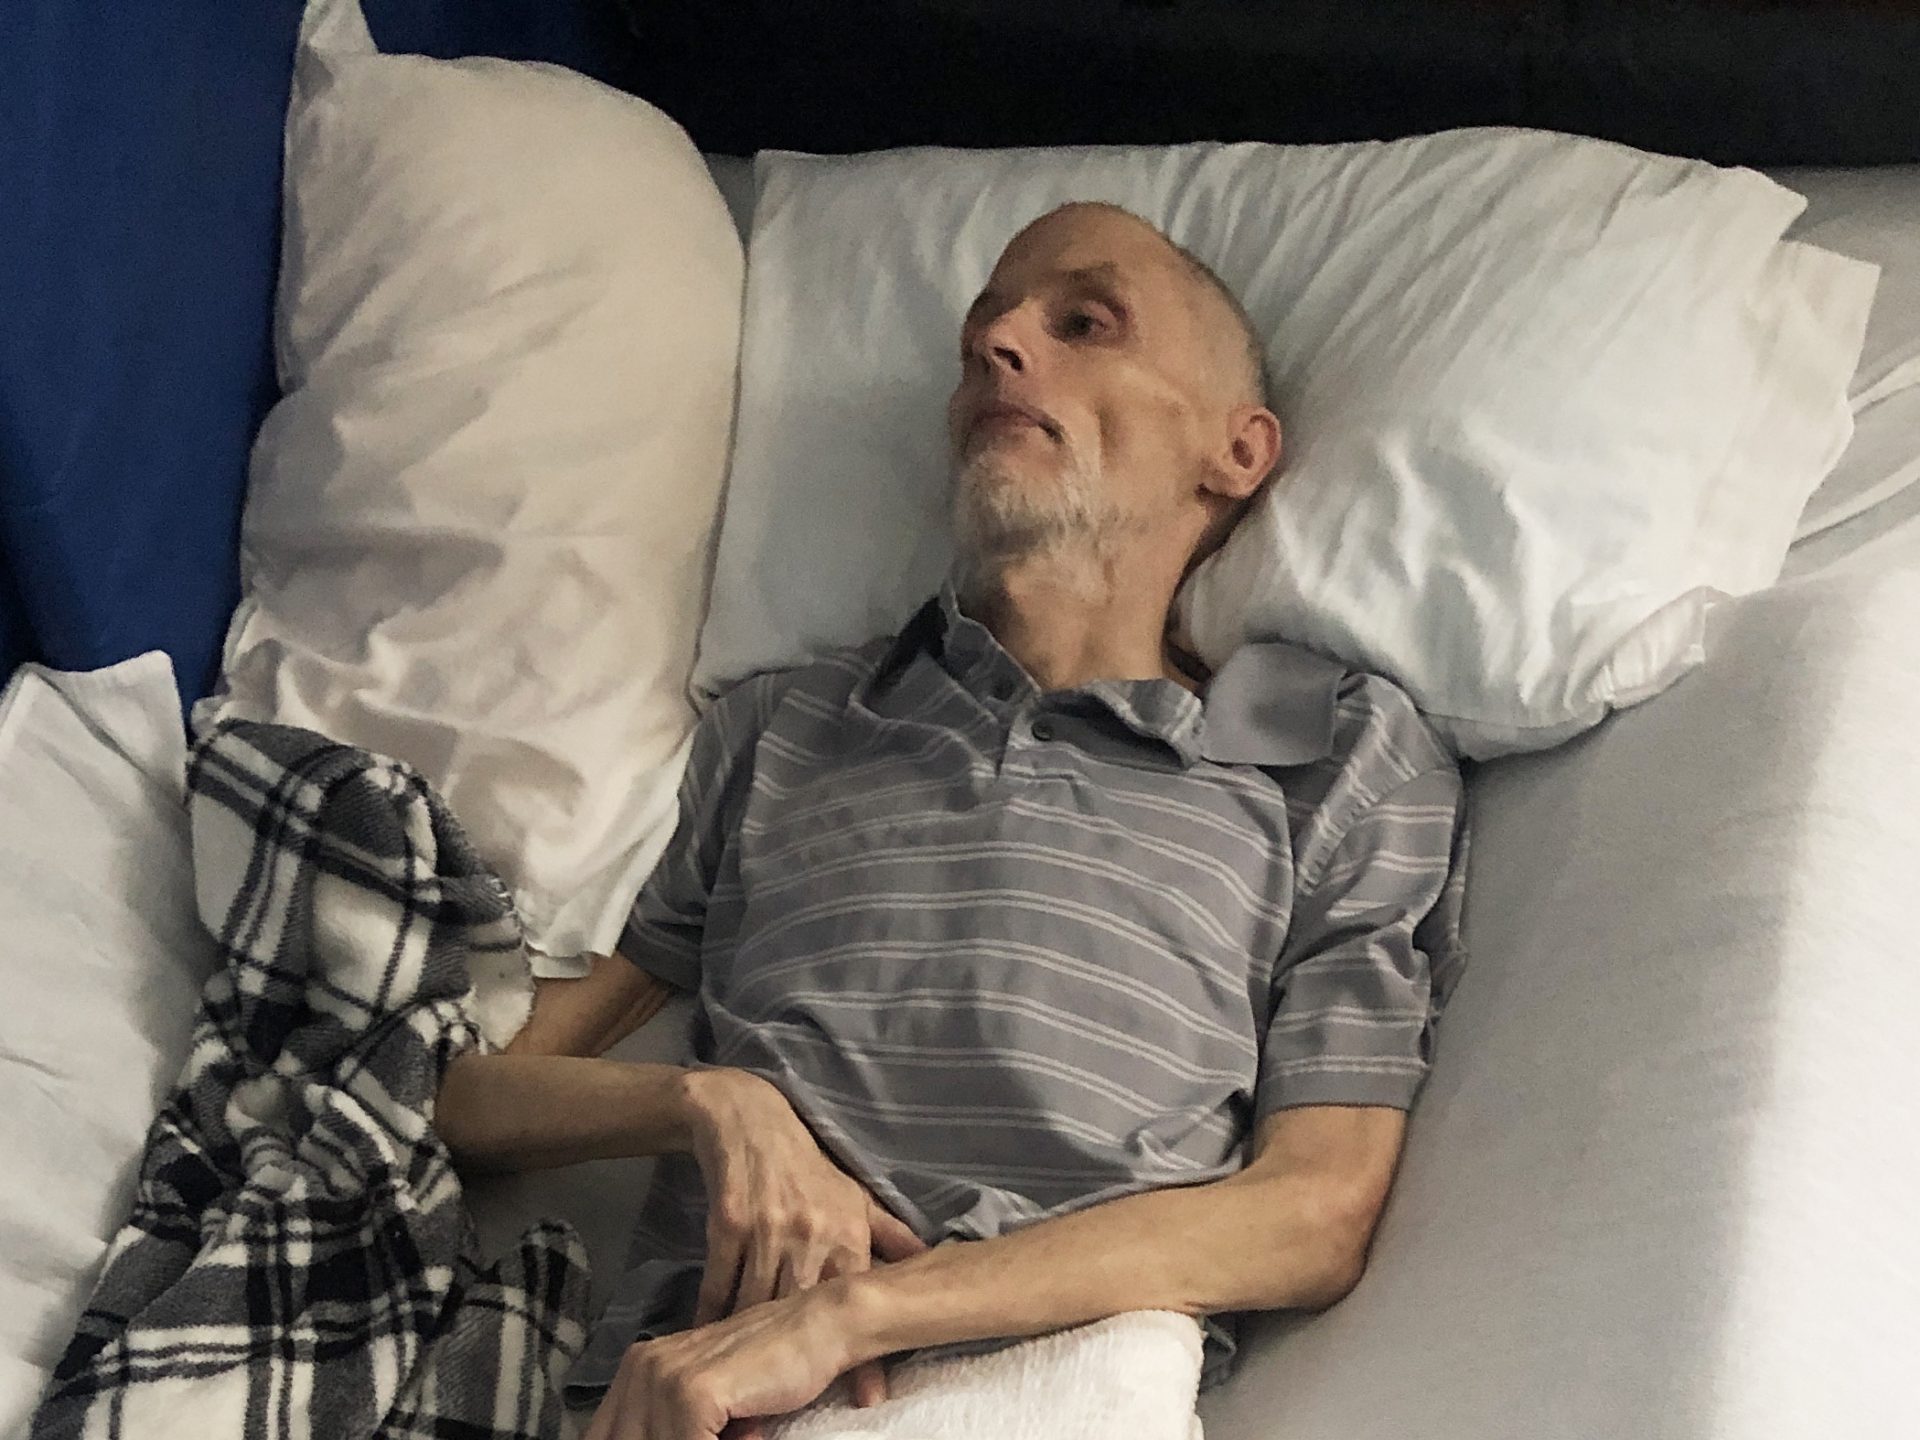 During the coronavirus restrictions, Matt's health declined rapidly and his weight dipped down to 90 pounds. Nancy moved him to a hospice facility that allowed family visitors. He died a few days later, with his wife and his daughter holding his hands.